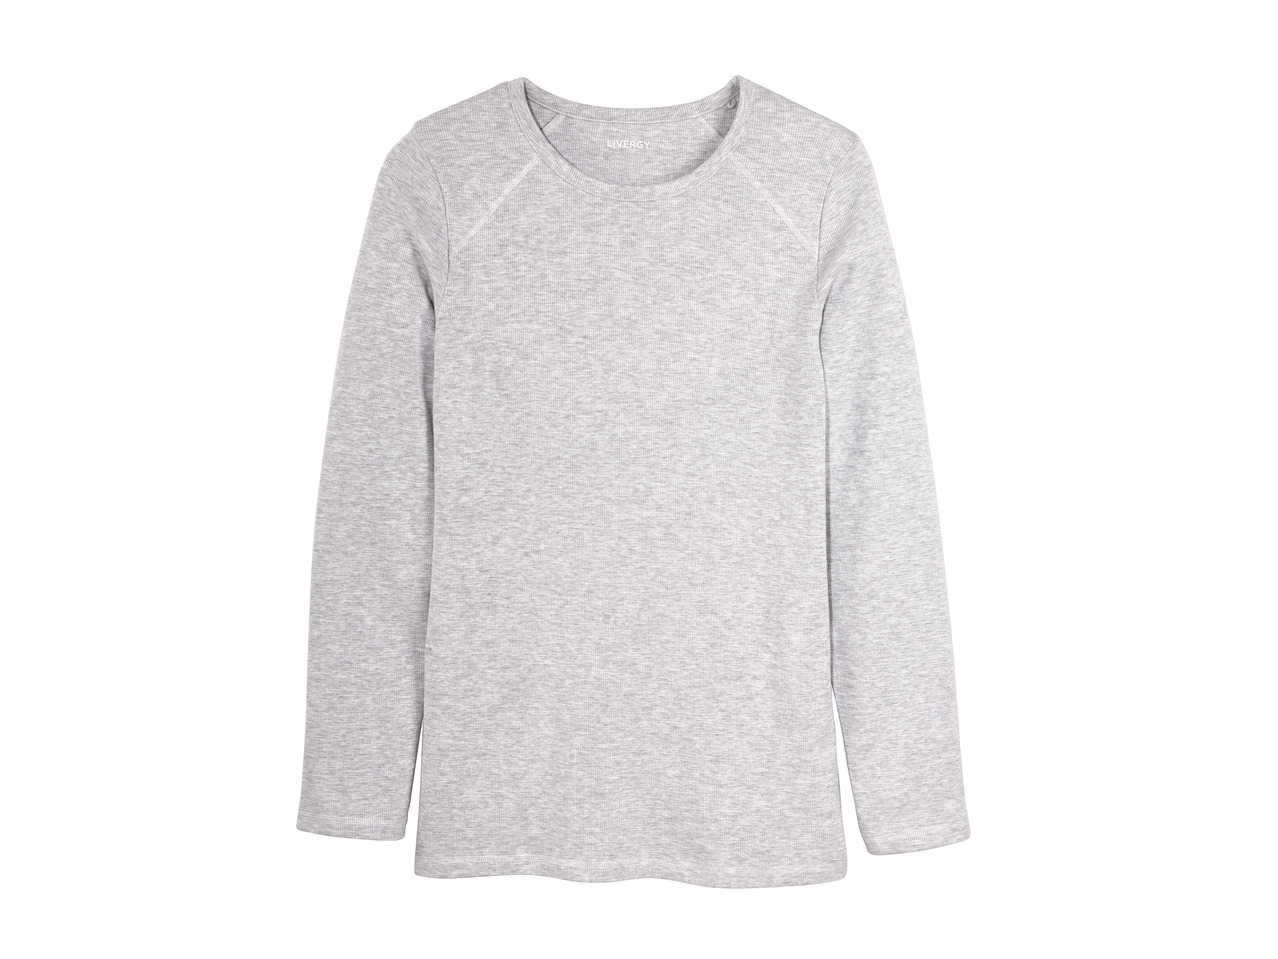 Livergy Long-Sleeved Top1